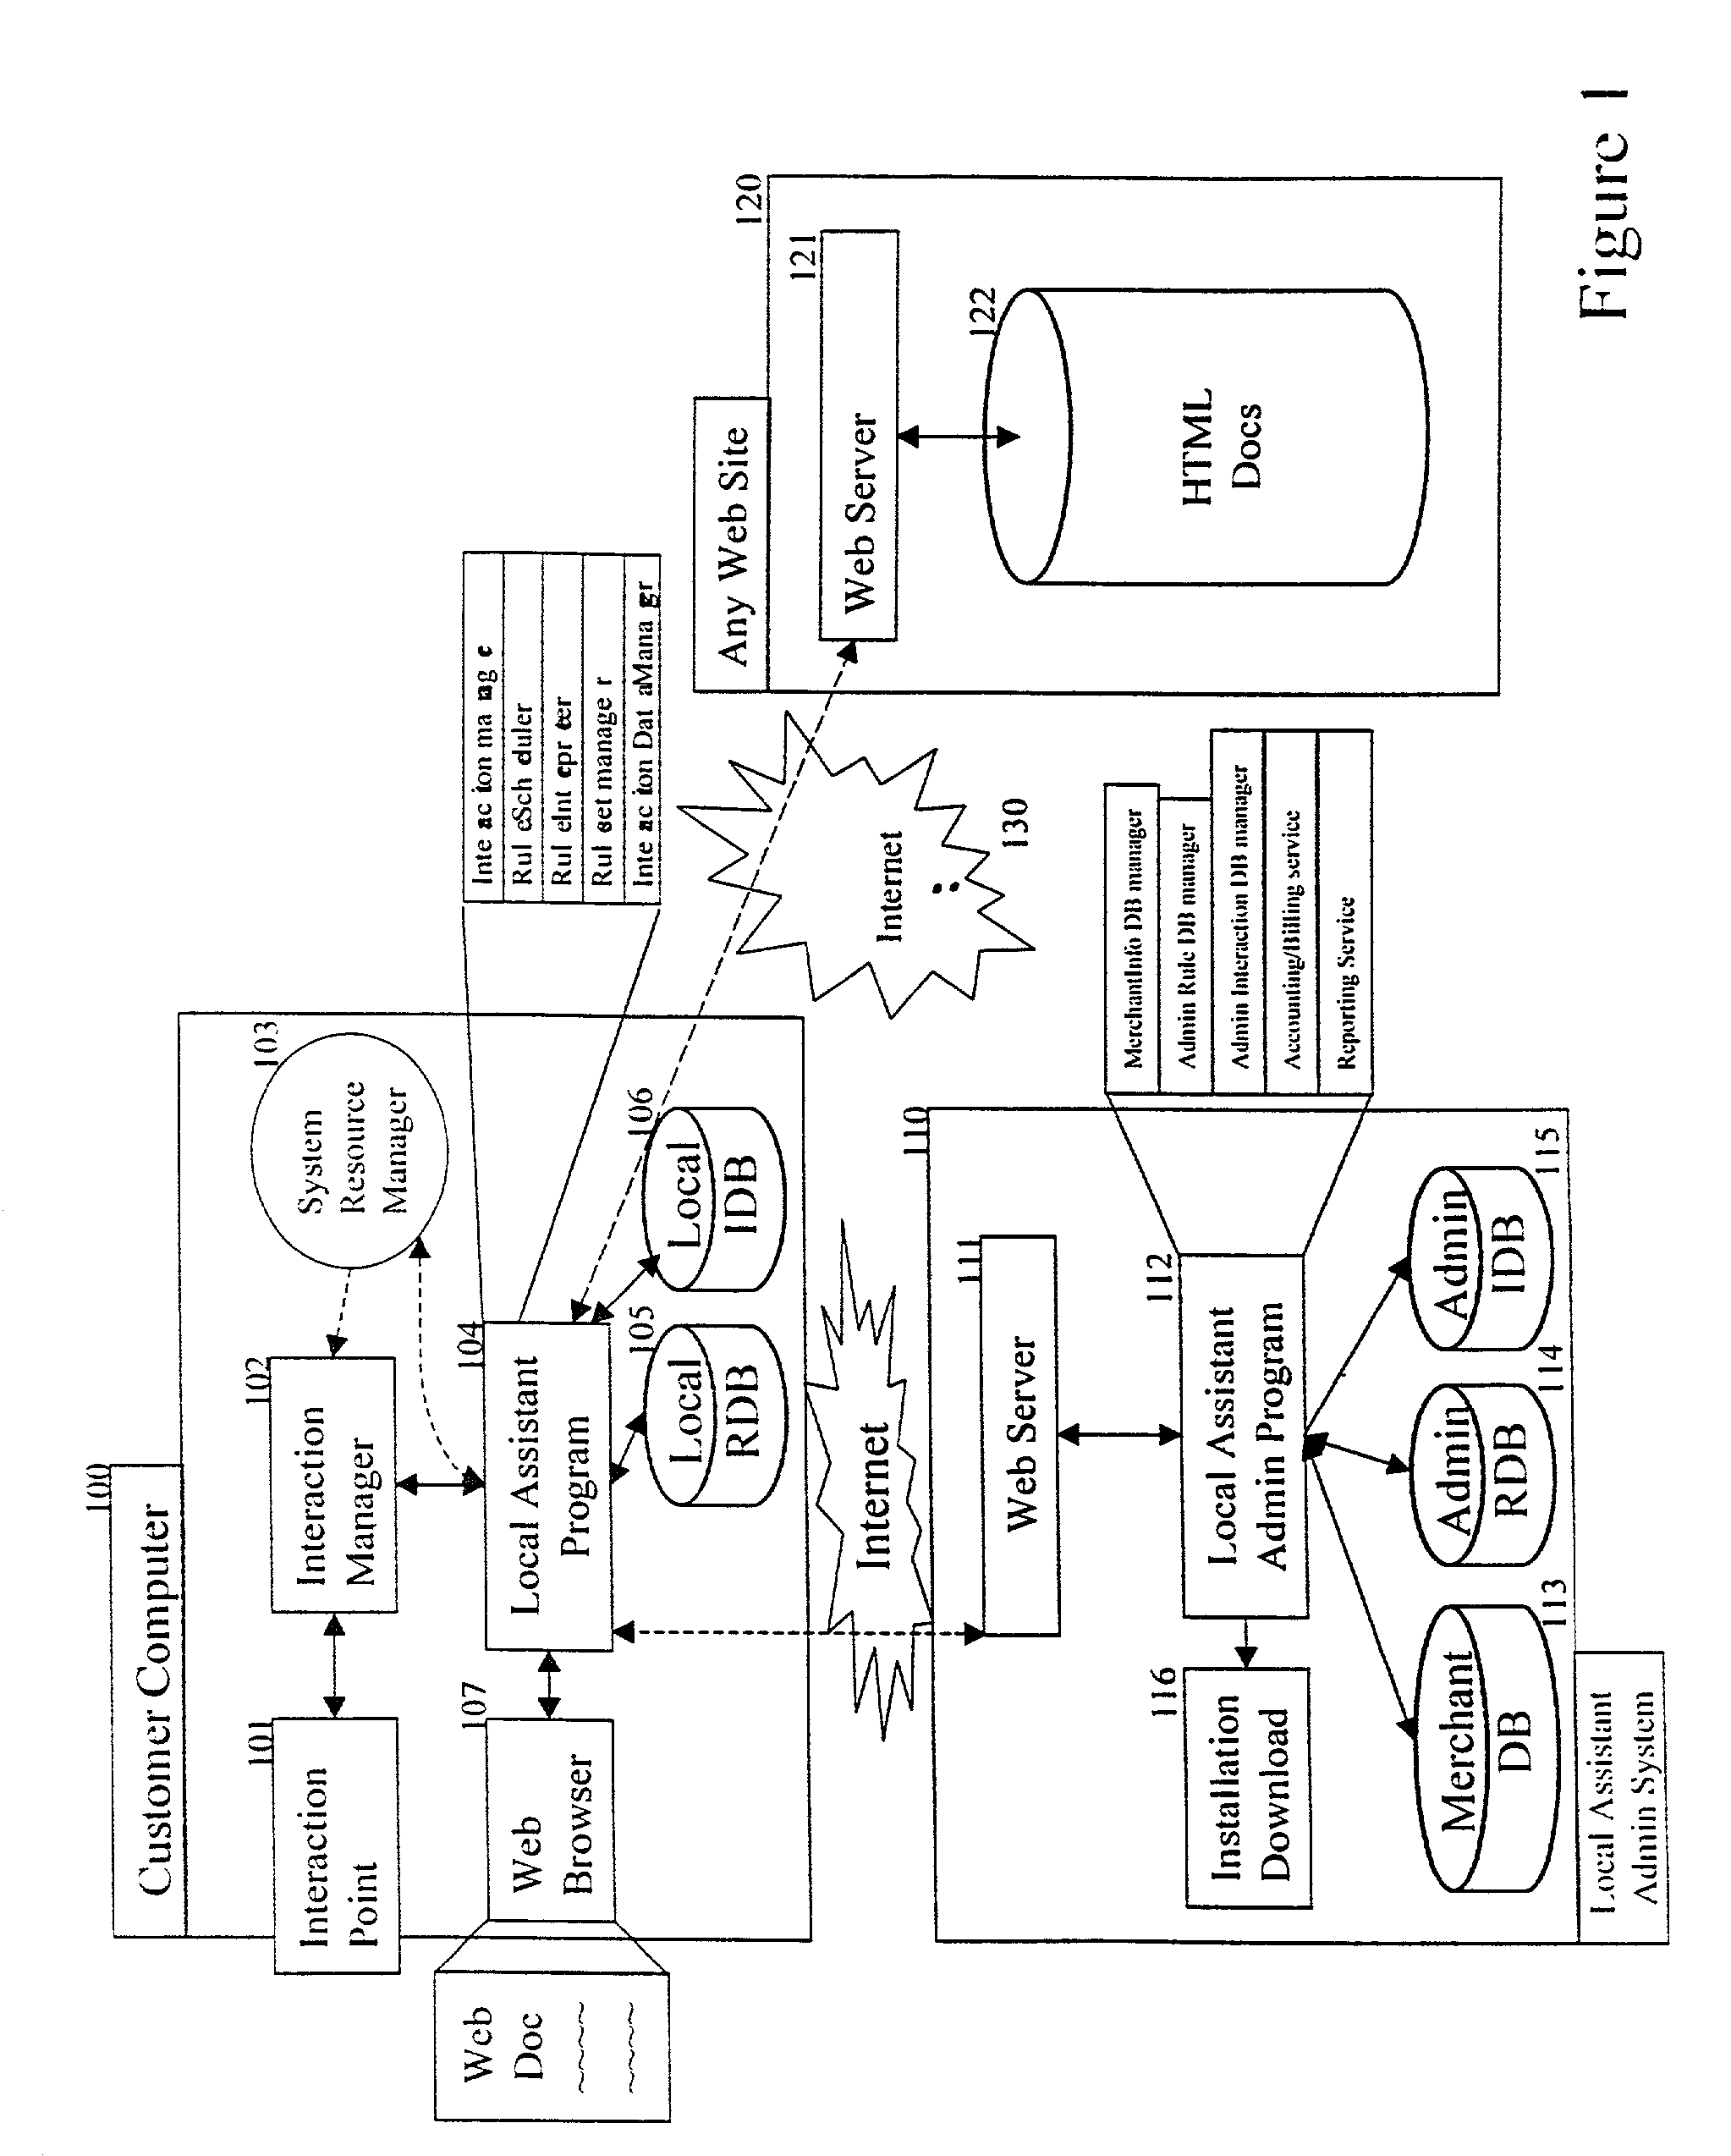 Method and system for modifying and transmitting data between a portable computer and a network